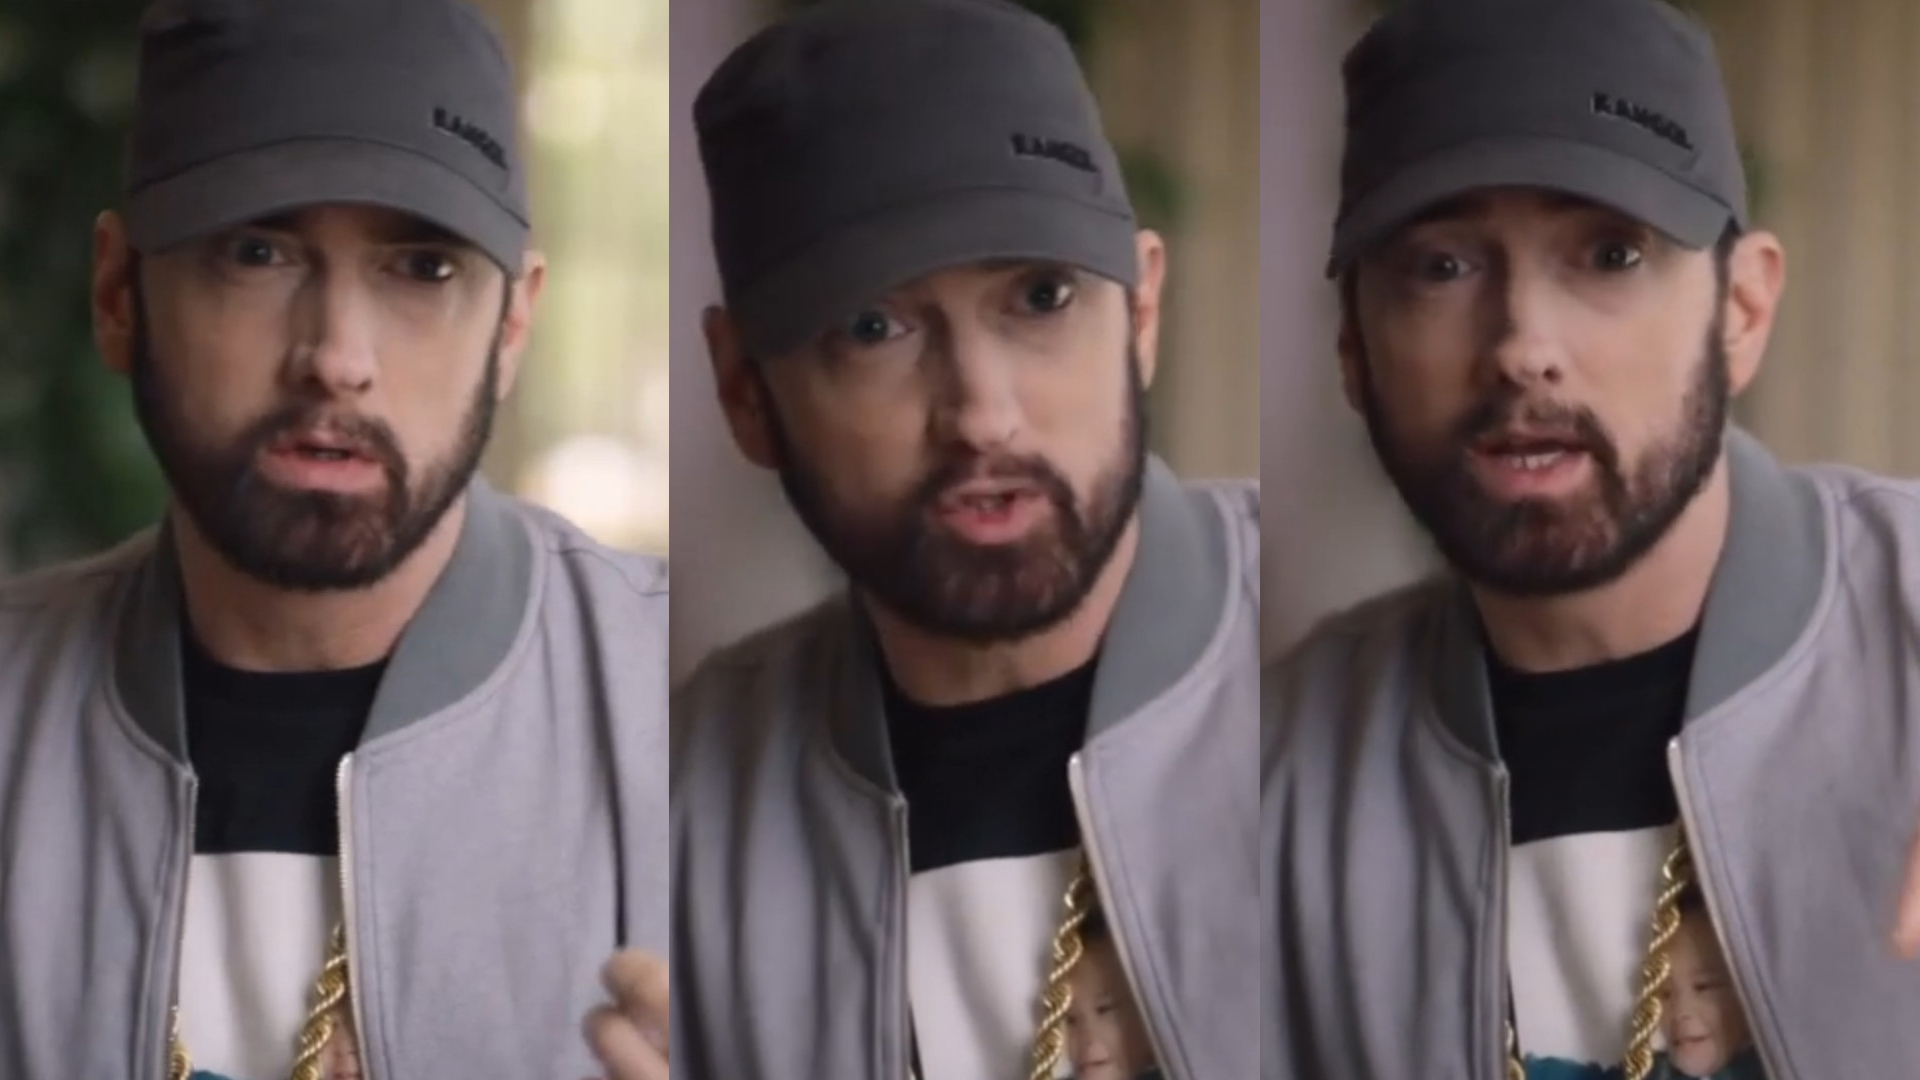 Eminem on “Mind Blowin’ ” Part by The D.O.C. He Never Understood In a New Documentary Teaser